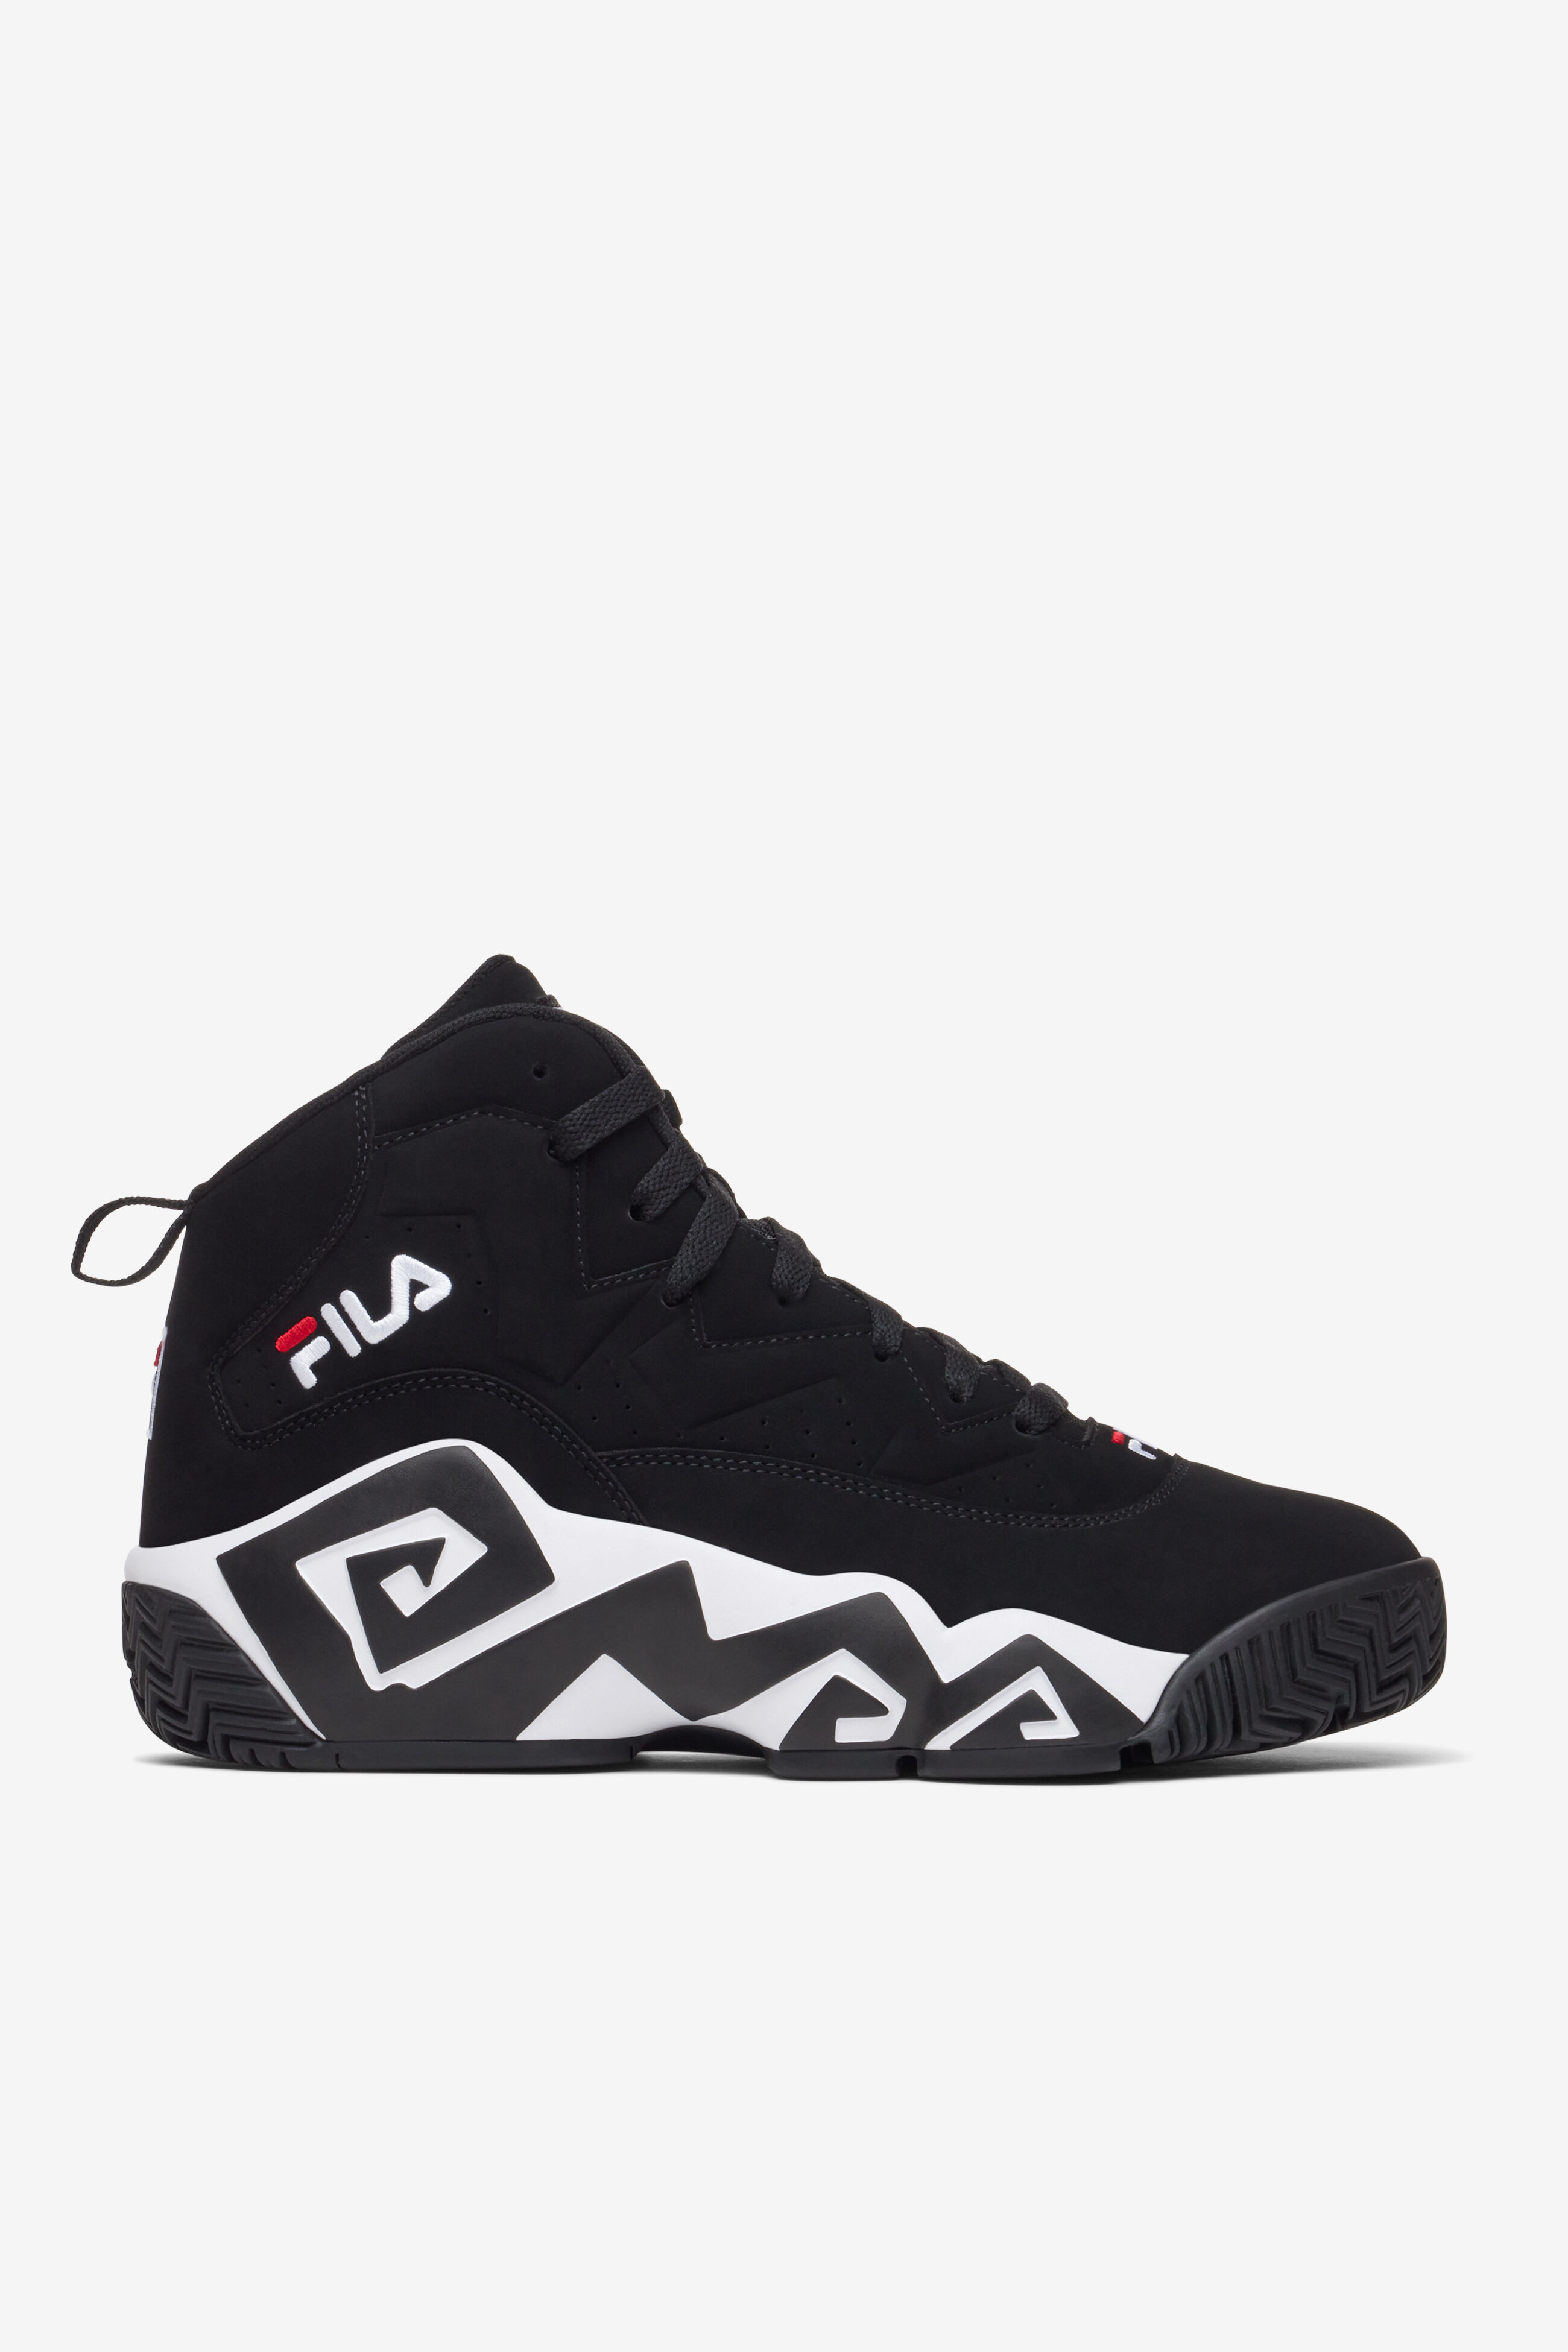 Hit the Court in Style With These PUMA Triple Basketball Shoes - Men's  Journal